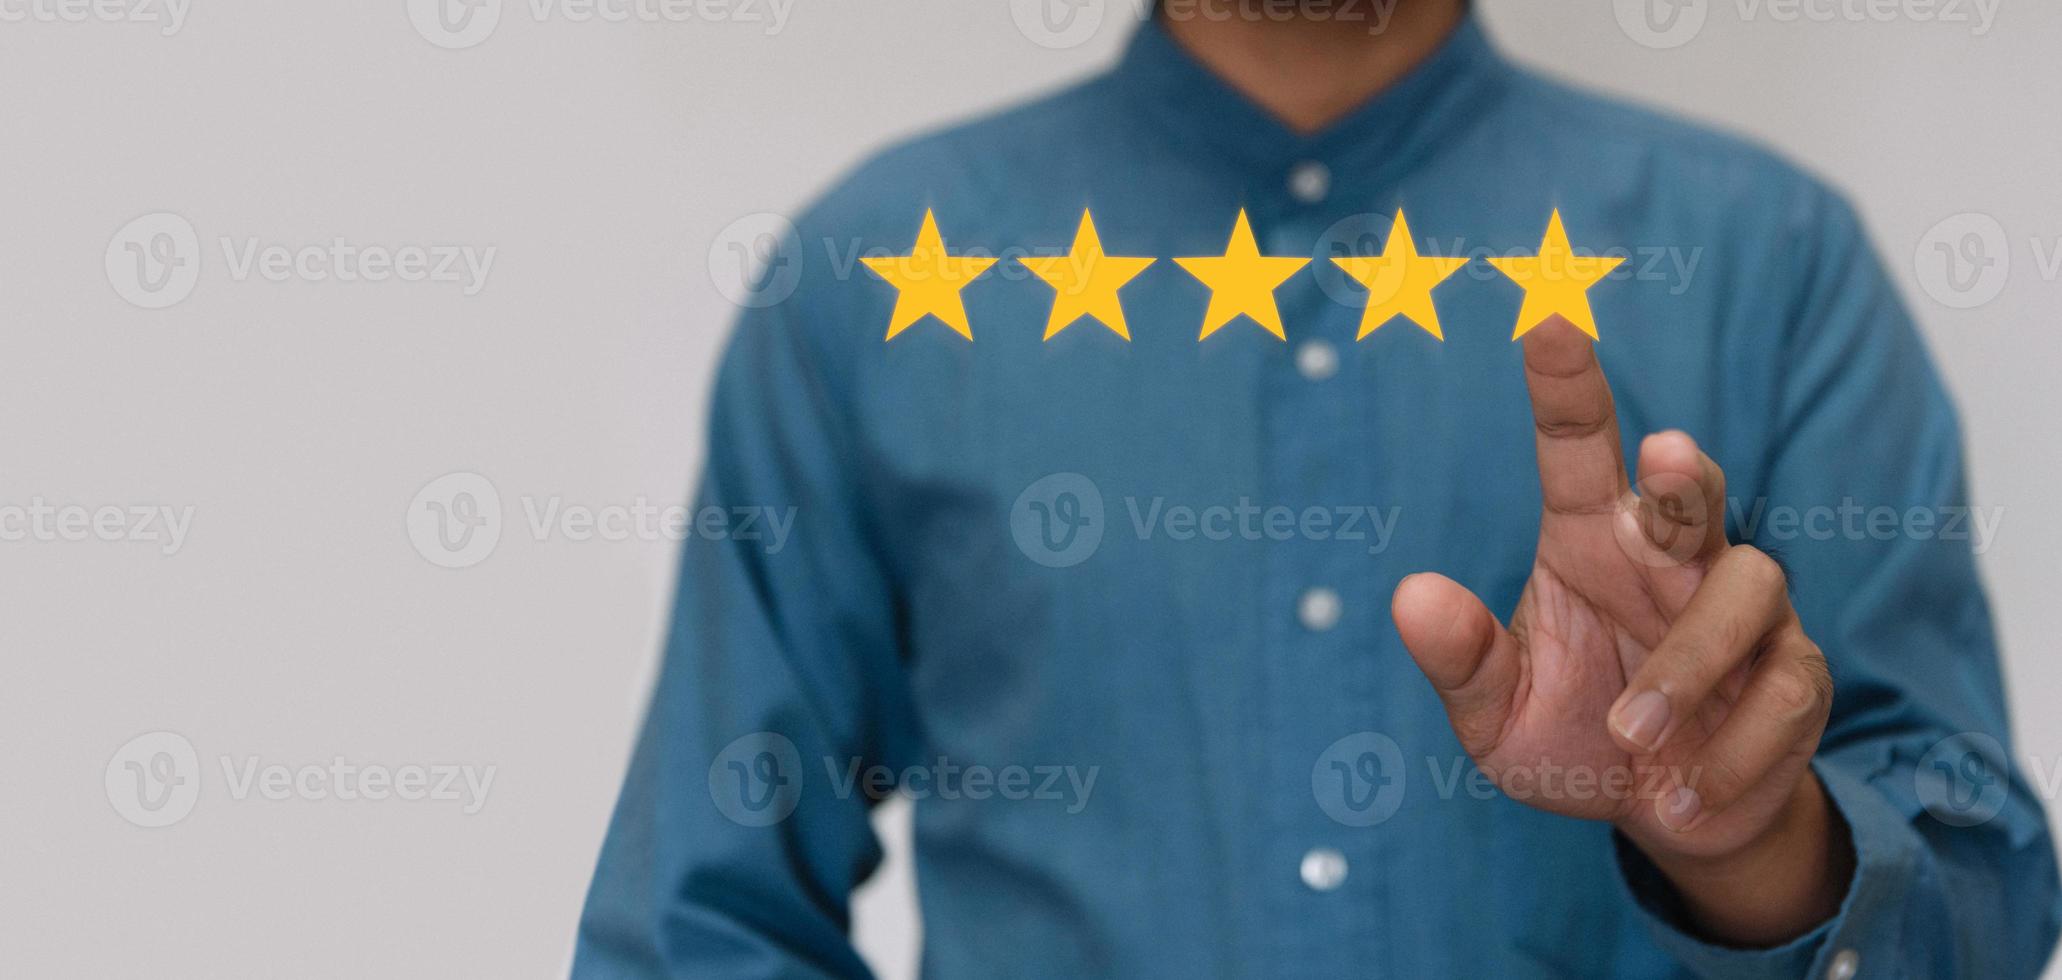 Businessmen wearing a light blue shirt to selecting the level of satisfaction score icons with copy space. Customer service experience and business satisfaction survey concept photo